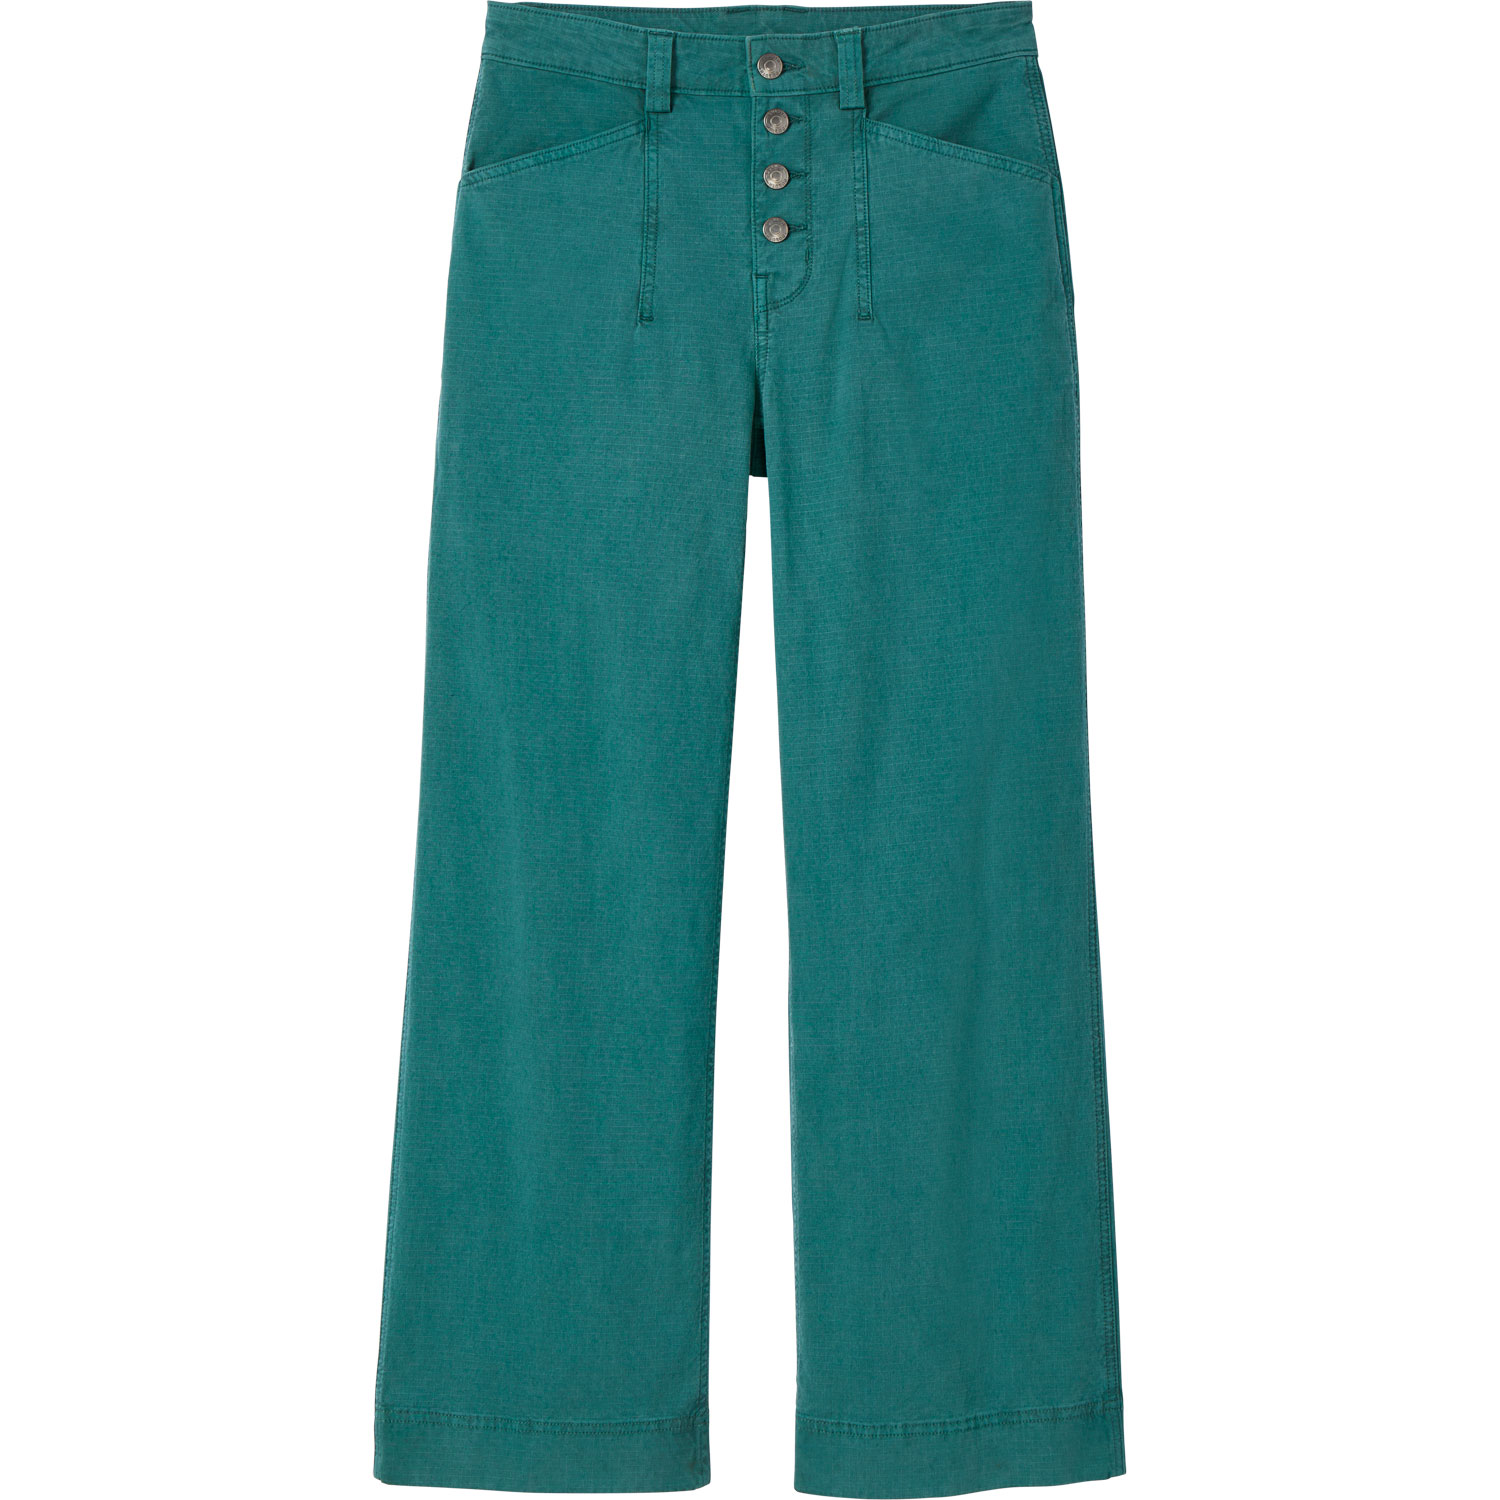 Duluth Trading Women's Dry On The Fly Improved Bootcut Pants Green - 18x29  GC